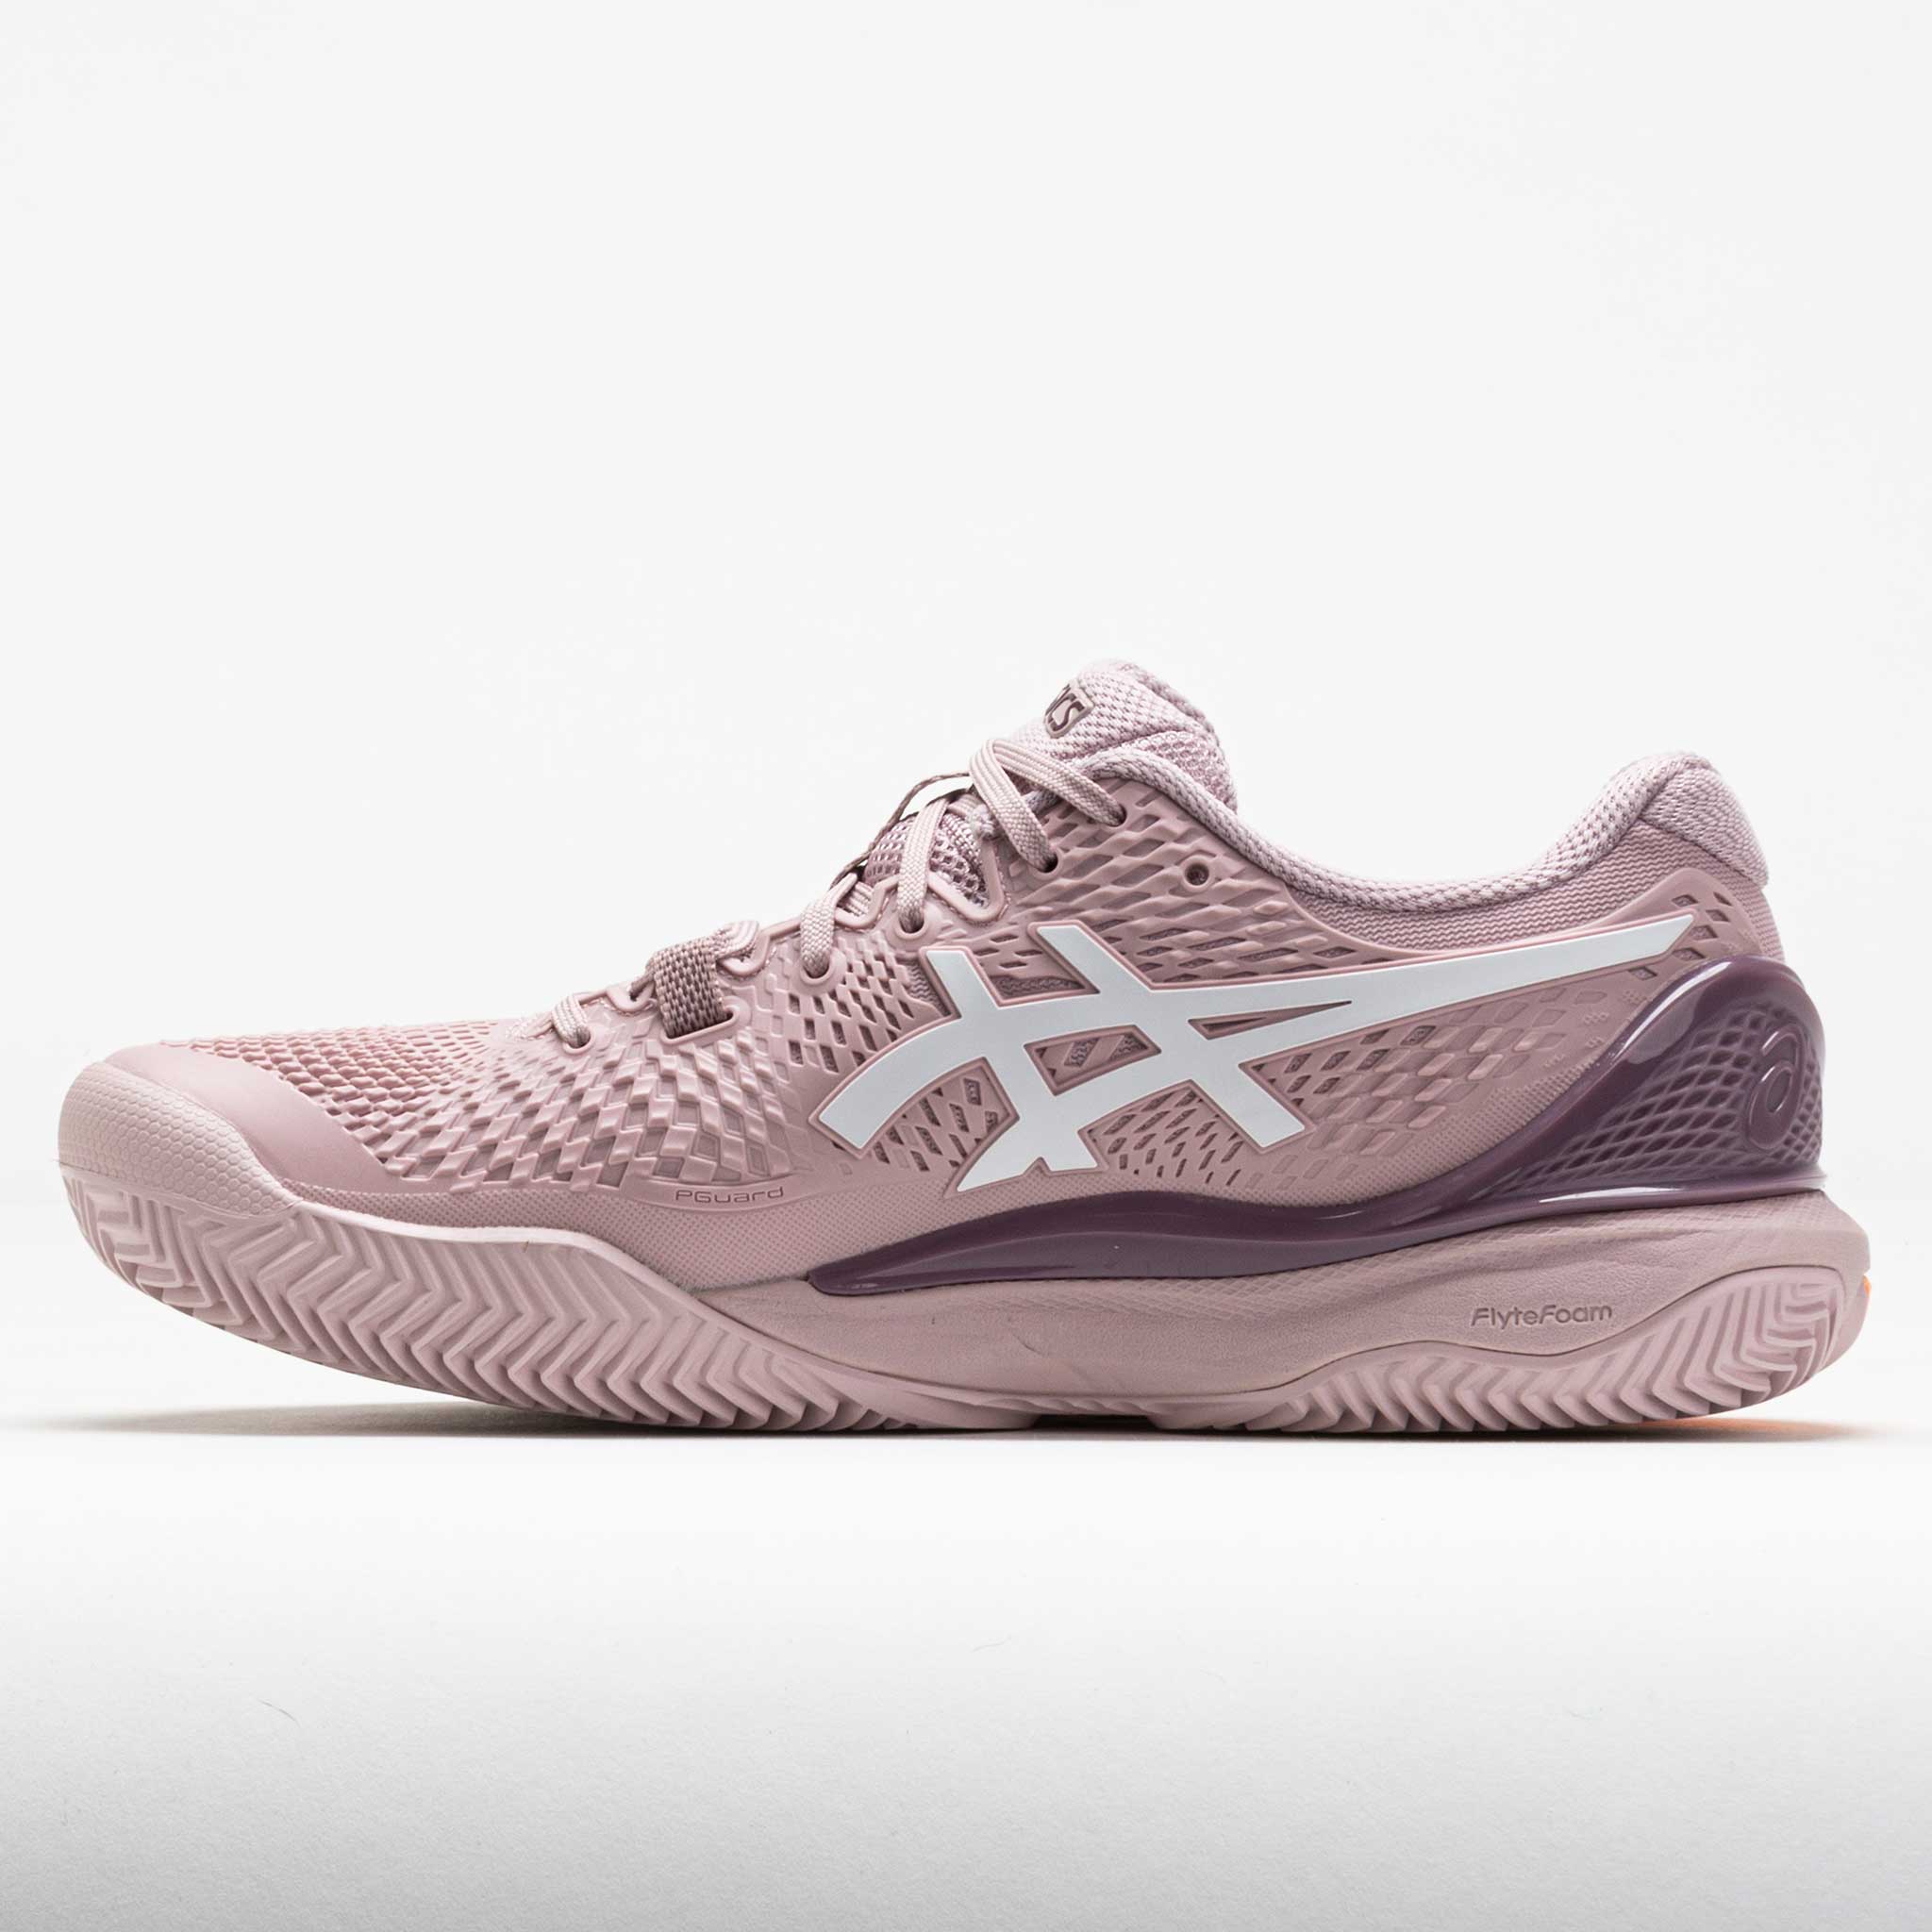 ASICS GEL-Resolution 9 Clay Women's Watershed Rose/White